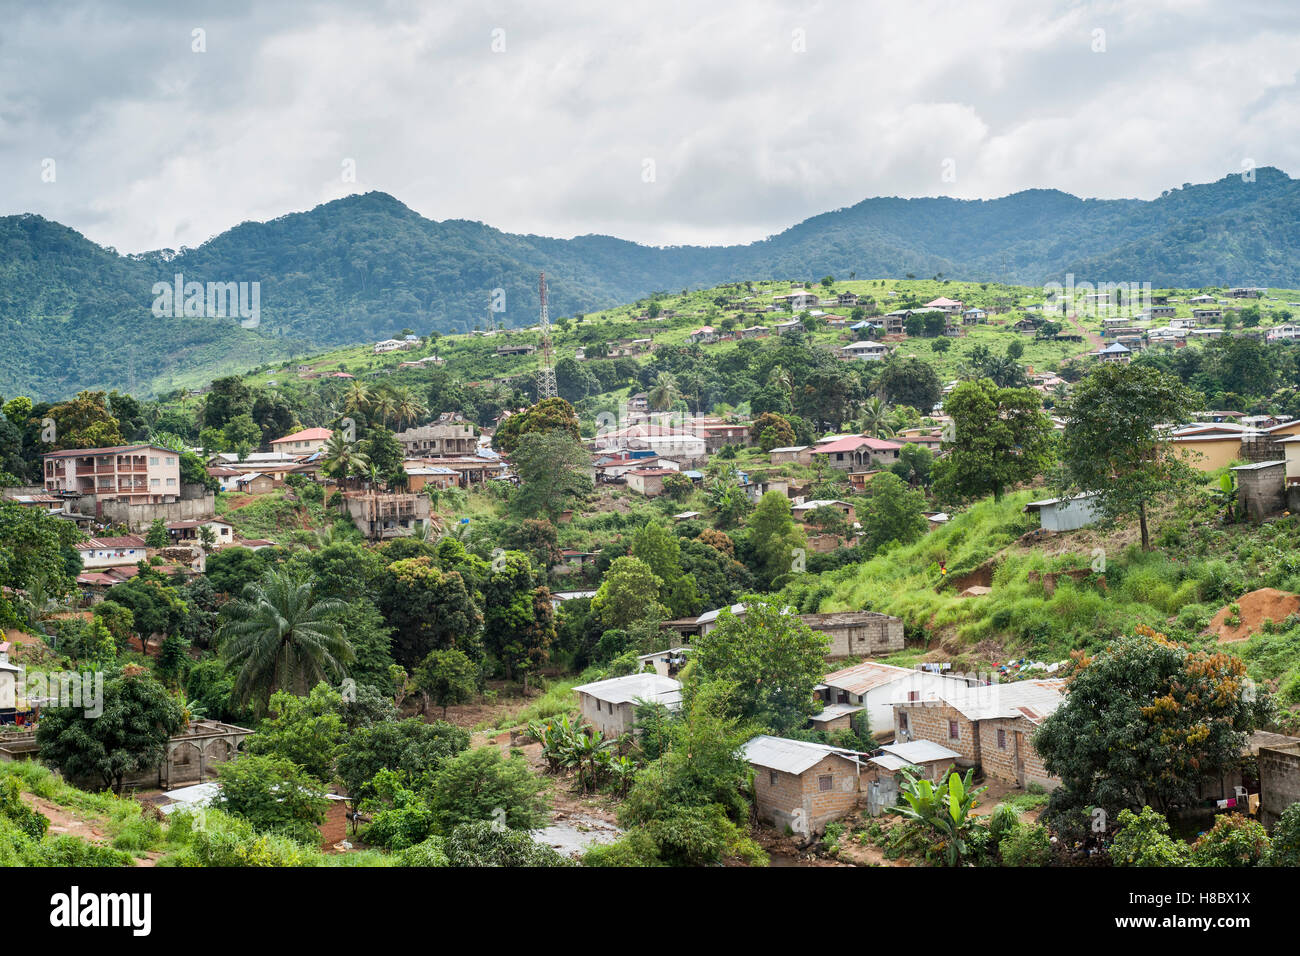 Houses on a hill in the Waterloo area, Sierra Leone Stock Photo